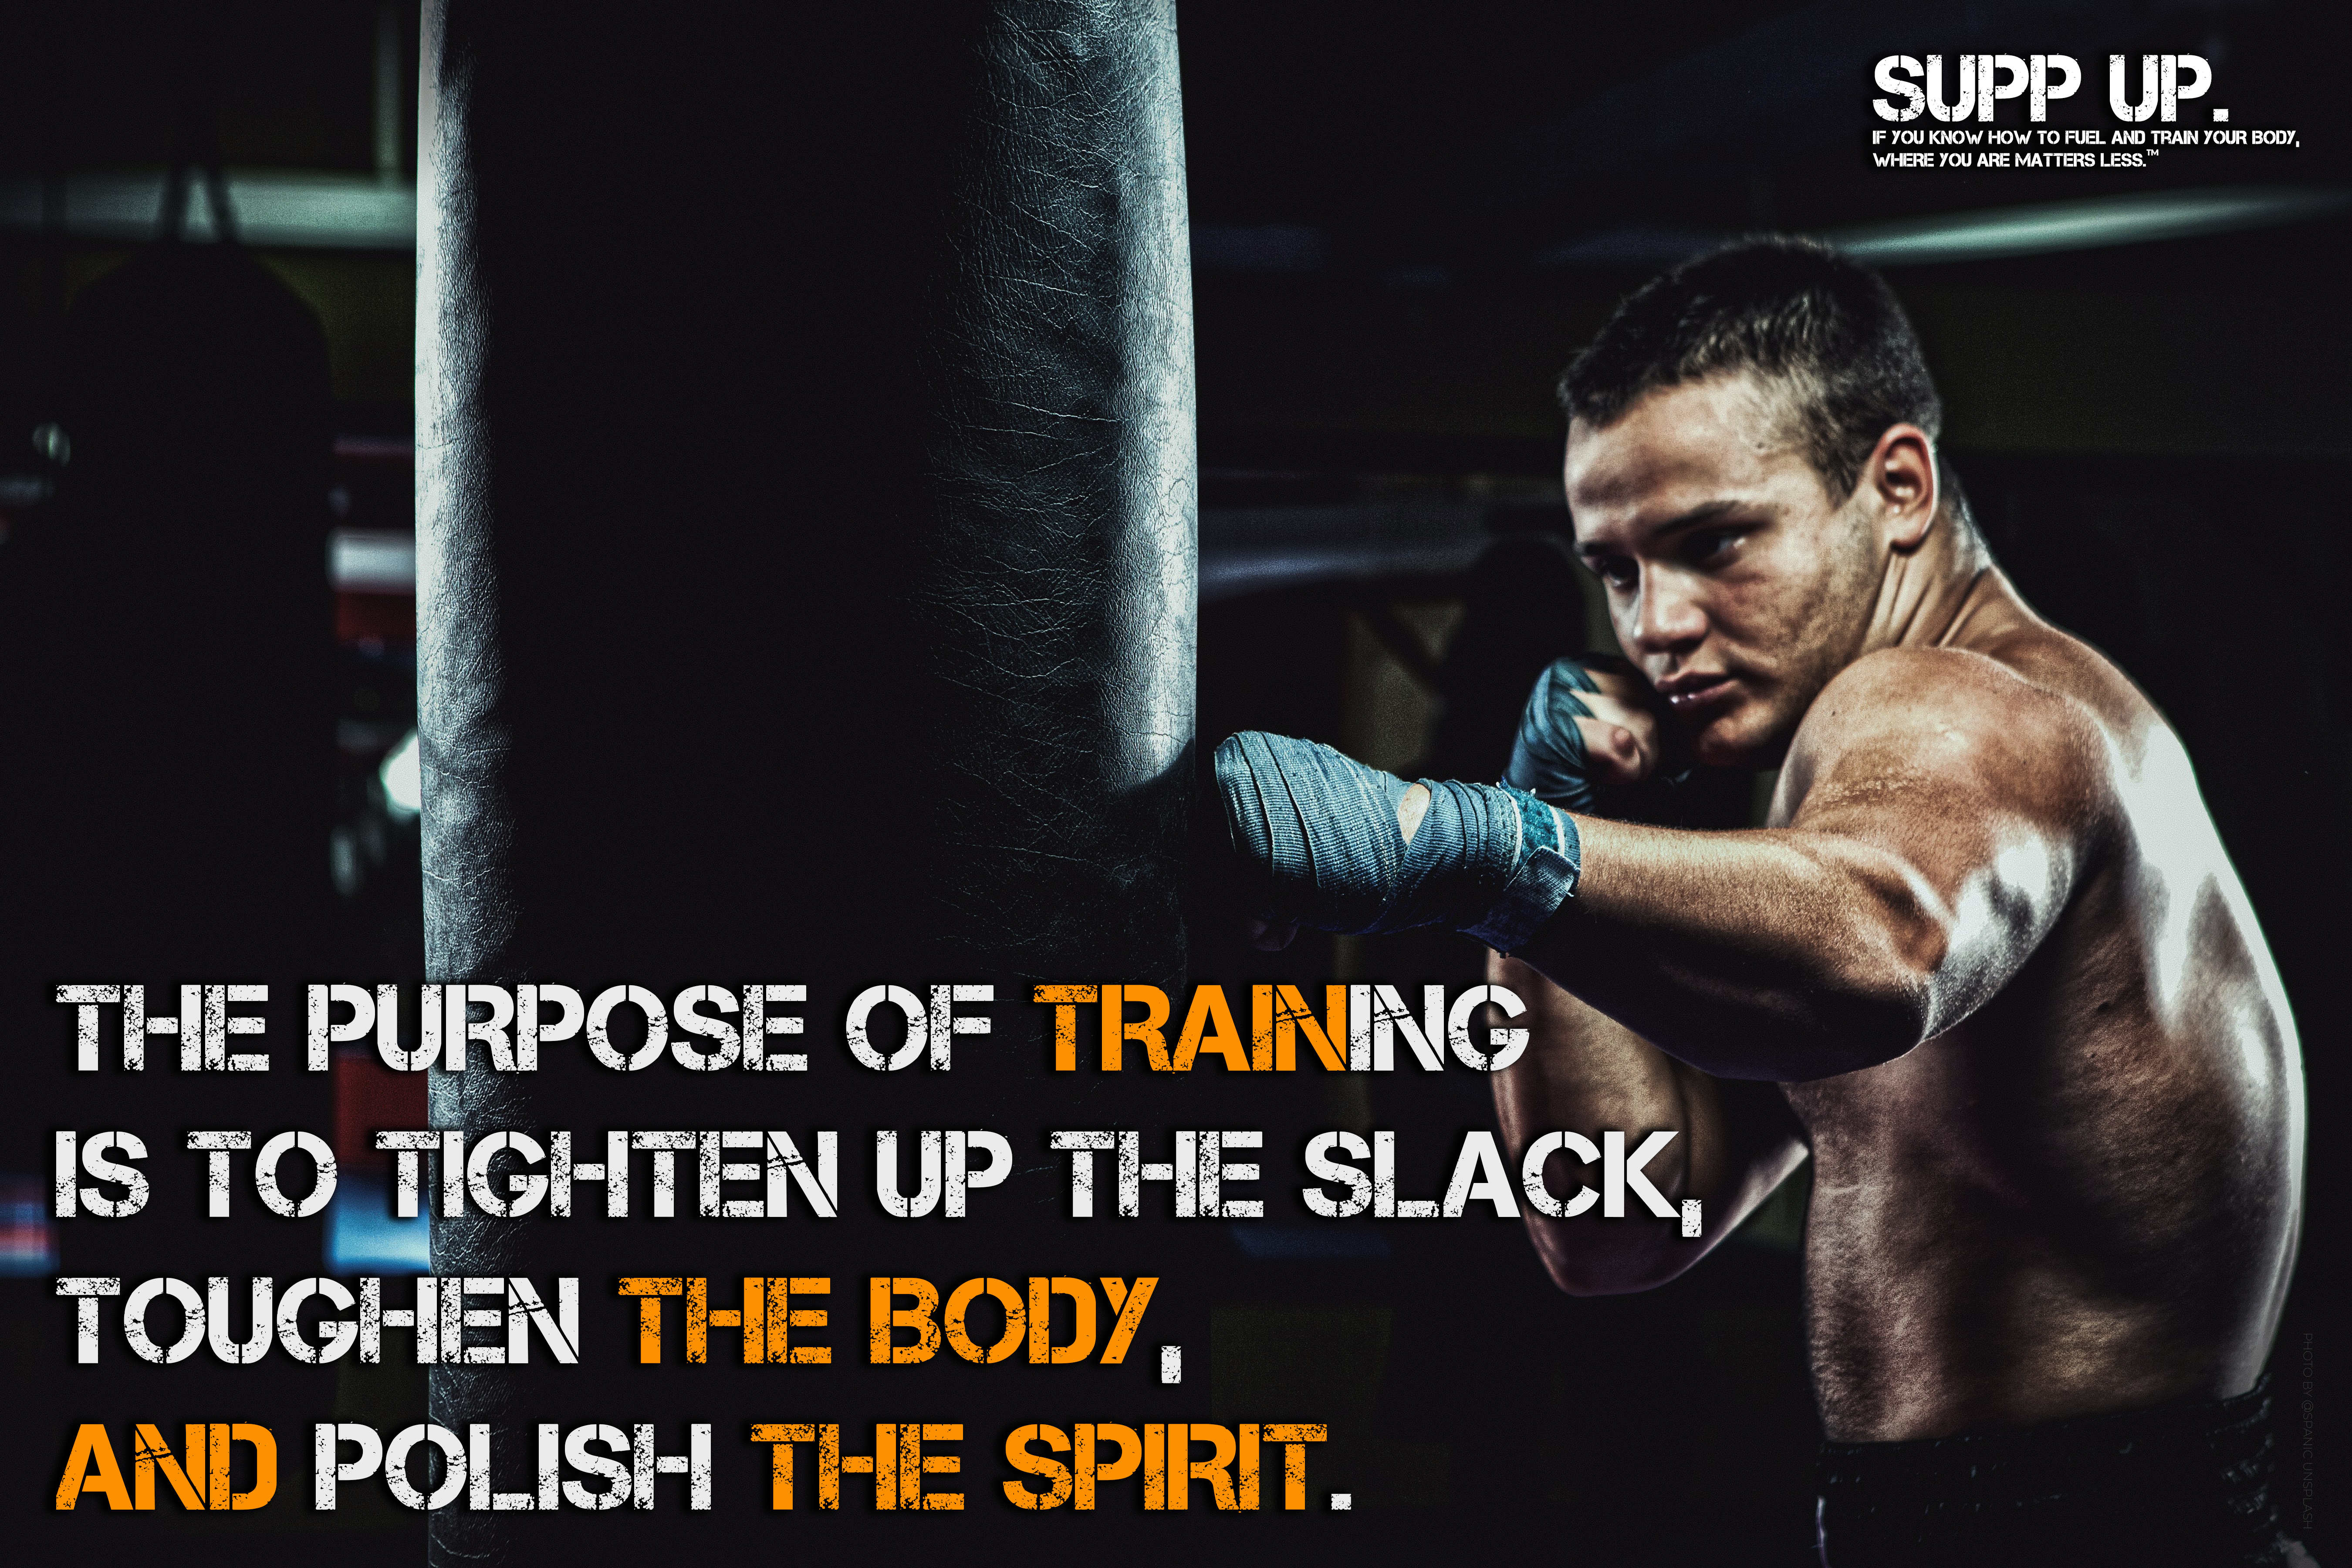 The purpose of training is to tighten up the slack toughen the body and polish the spirit quote, SUPP UP Quotes, Fitness quotes, Workout quotes, exercise quote posters, quote posters, gym posters, SUPP UP Posters